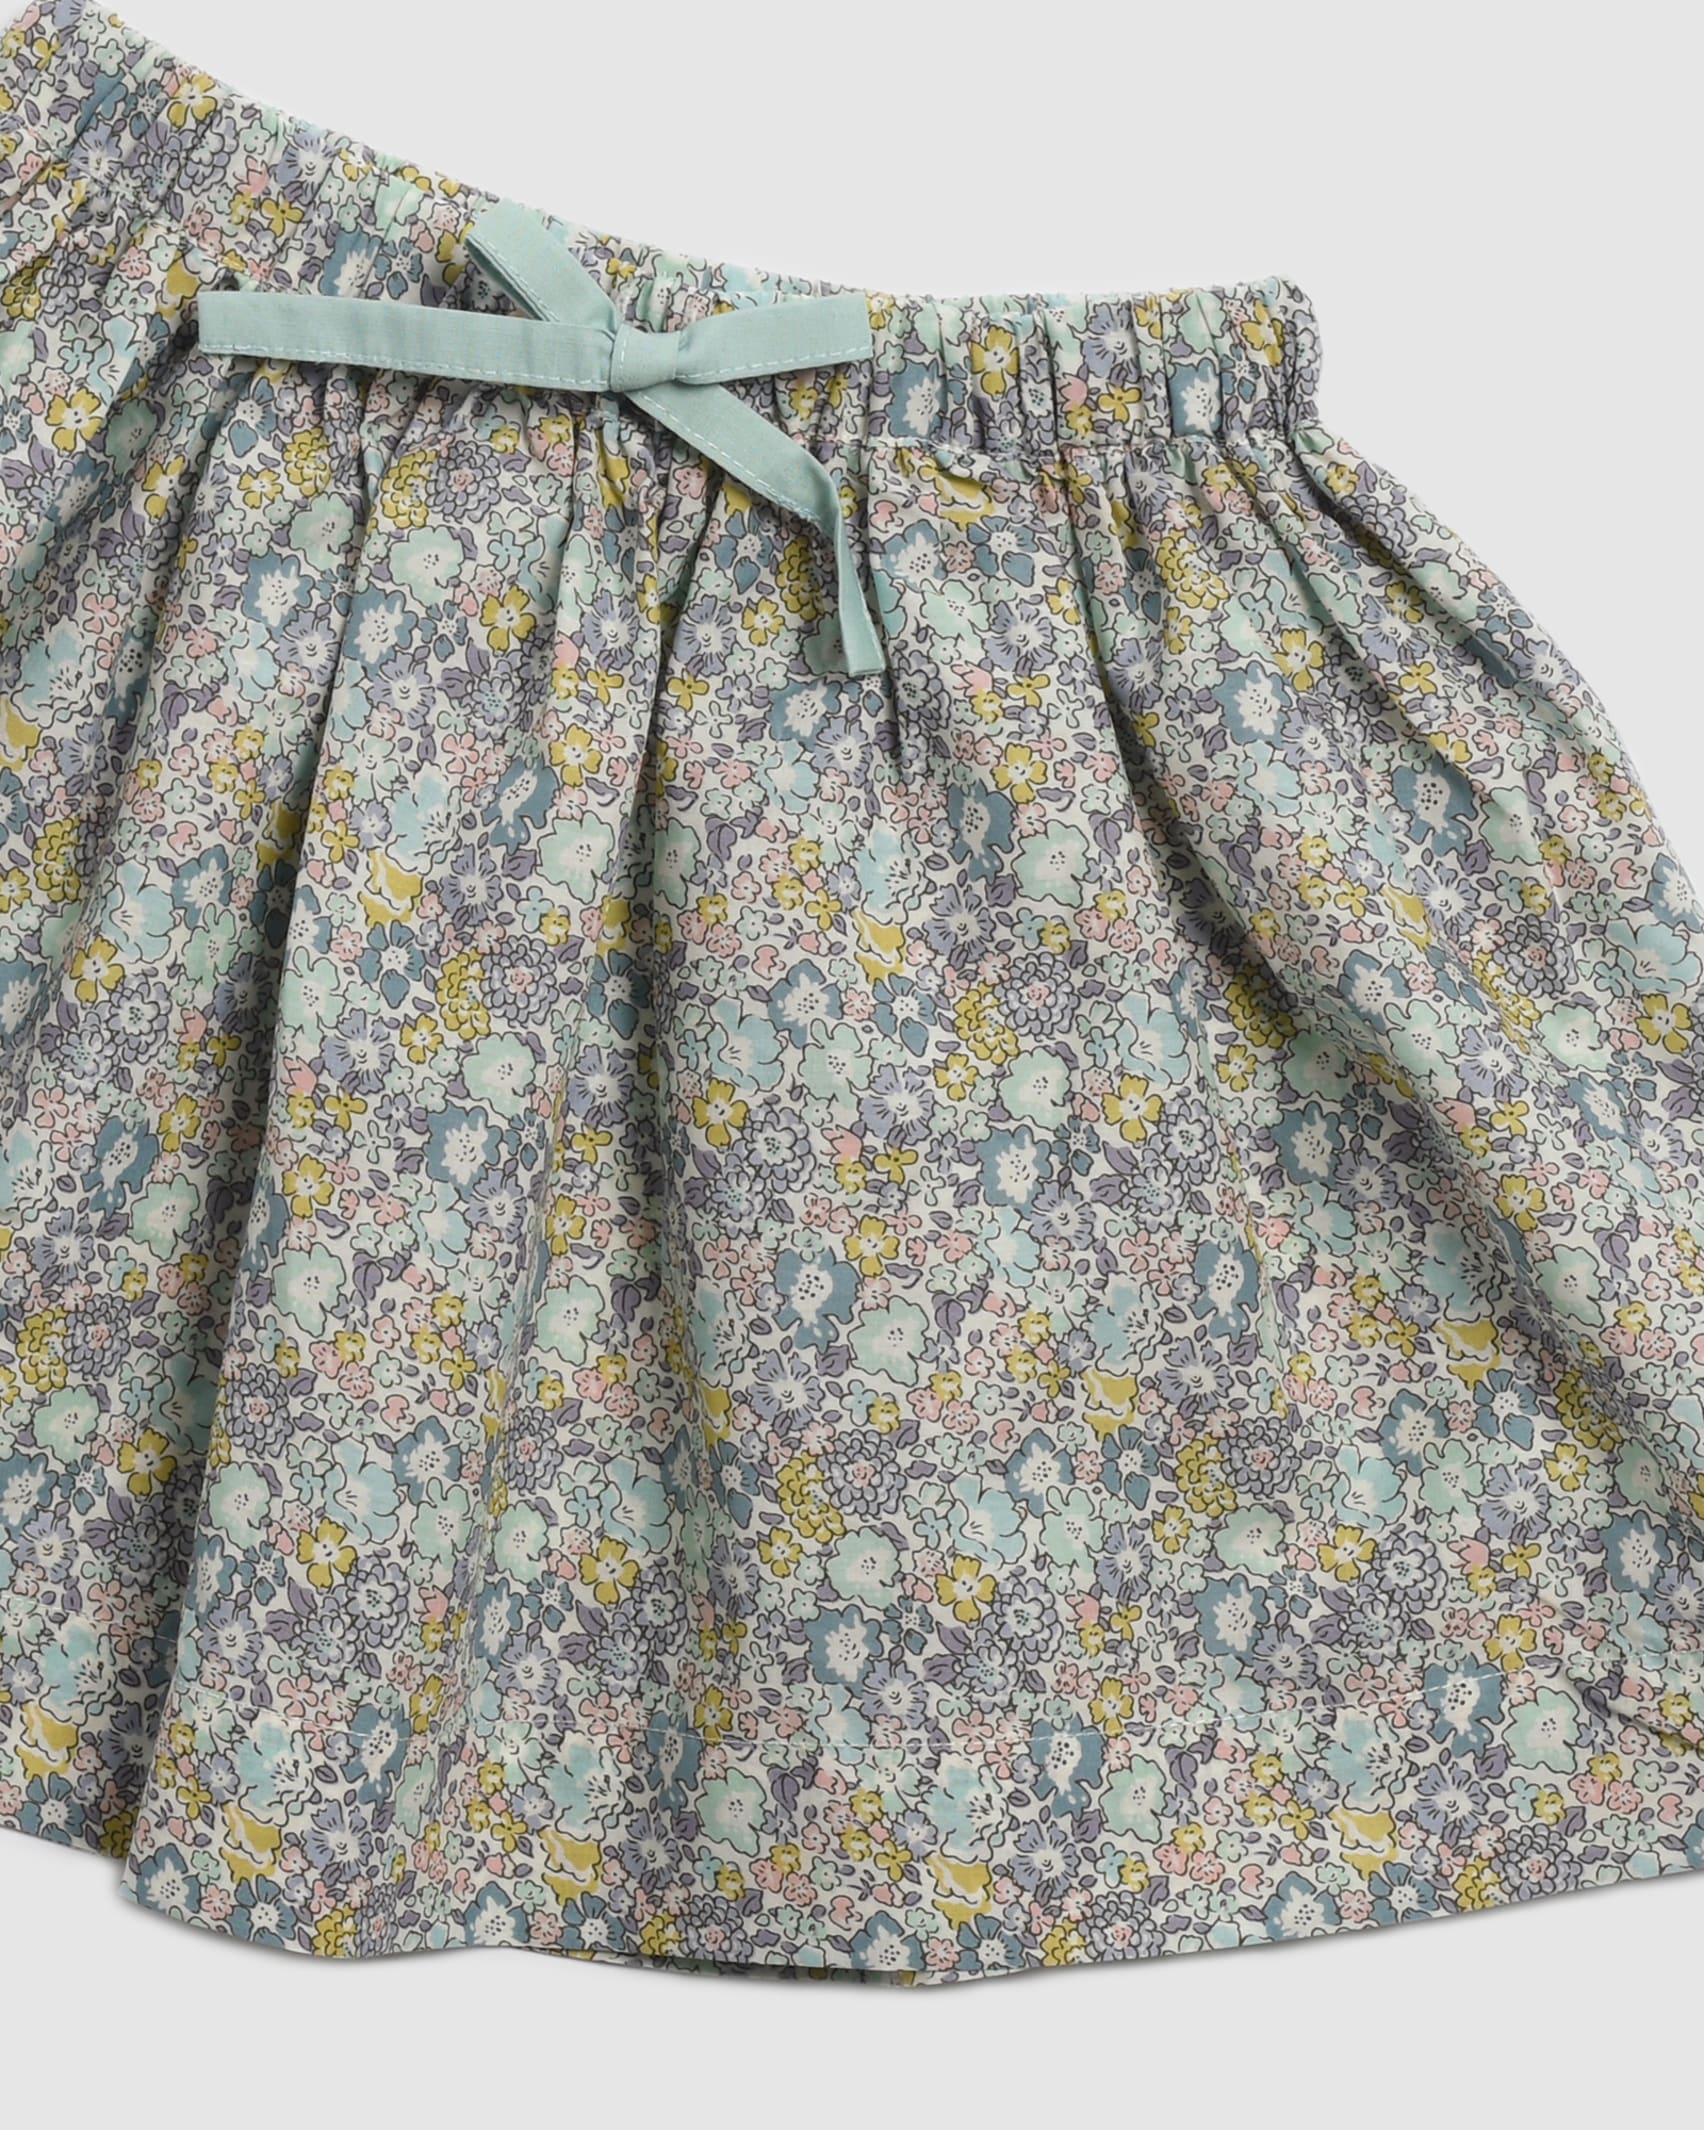 Mish Liberty Cotton Skirt in BLUE MULTI